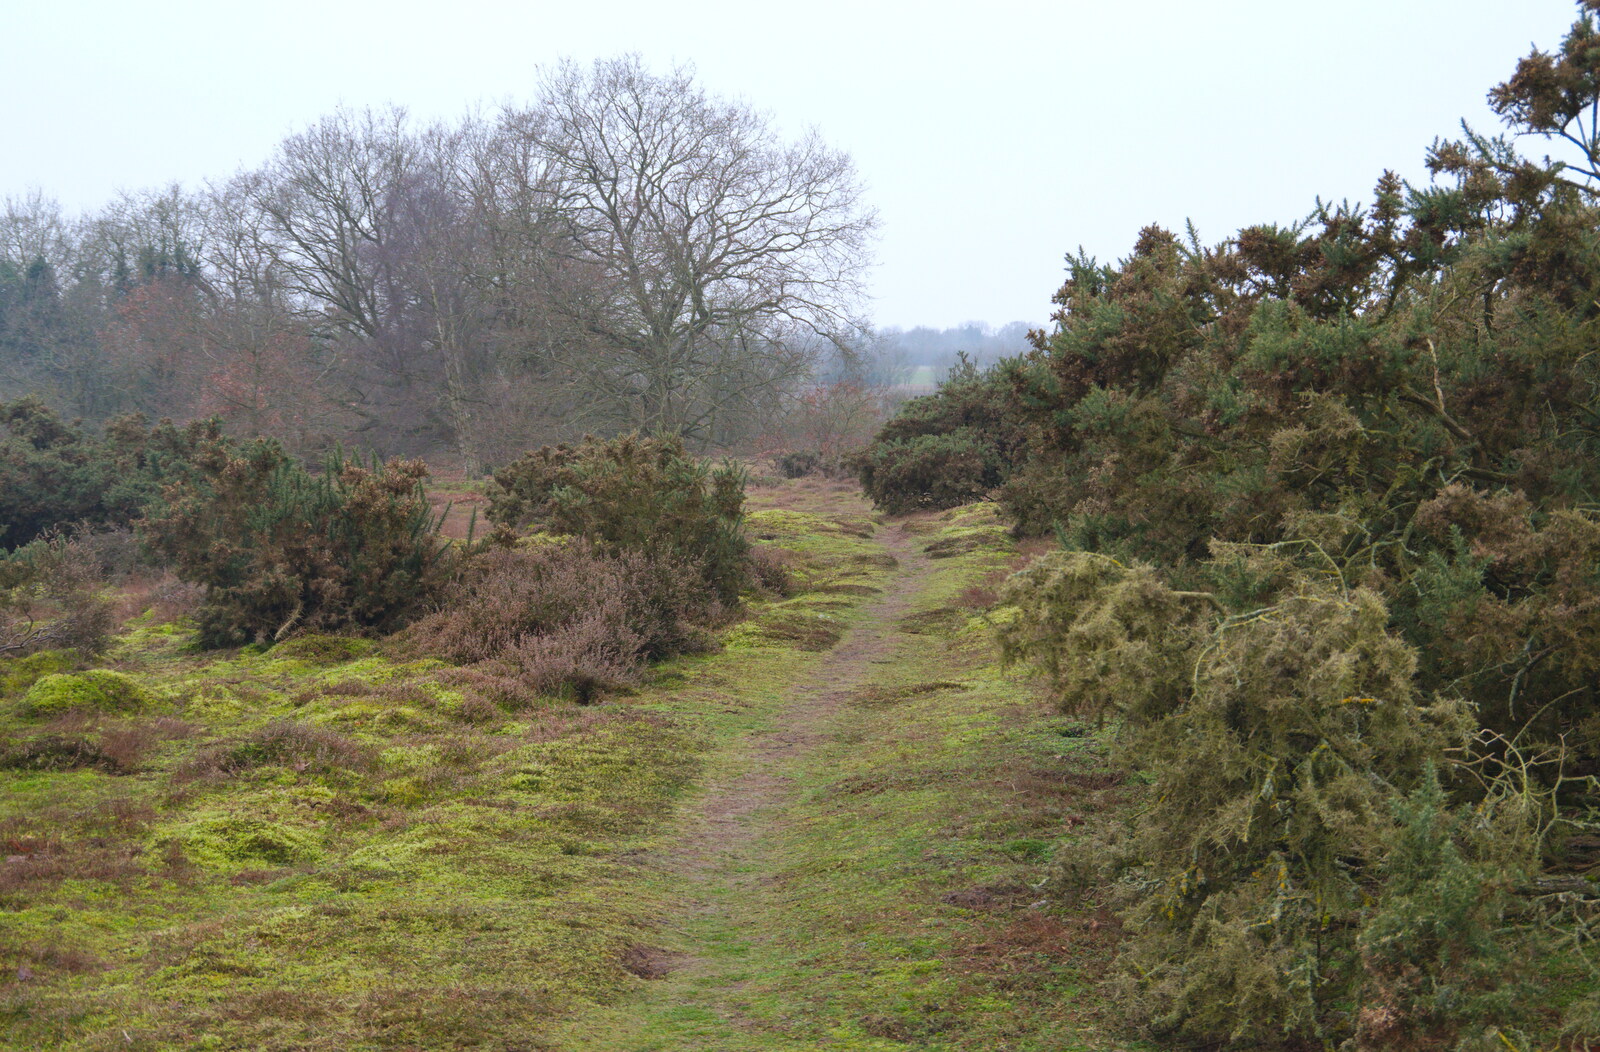 A path disappears into the Ling from New Year's Day on the Ling, Wortham, Suffolk - 1st January 2020